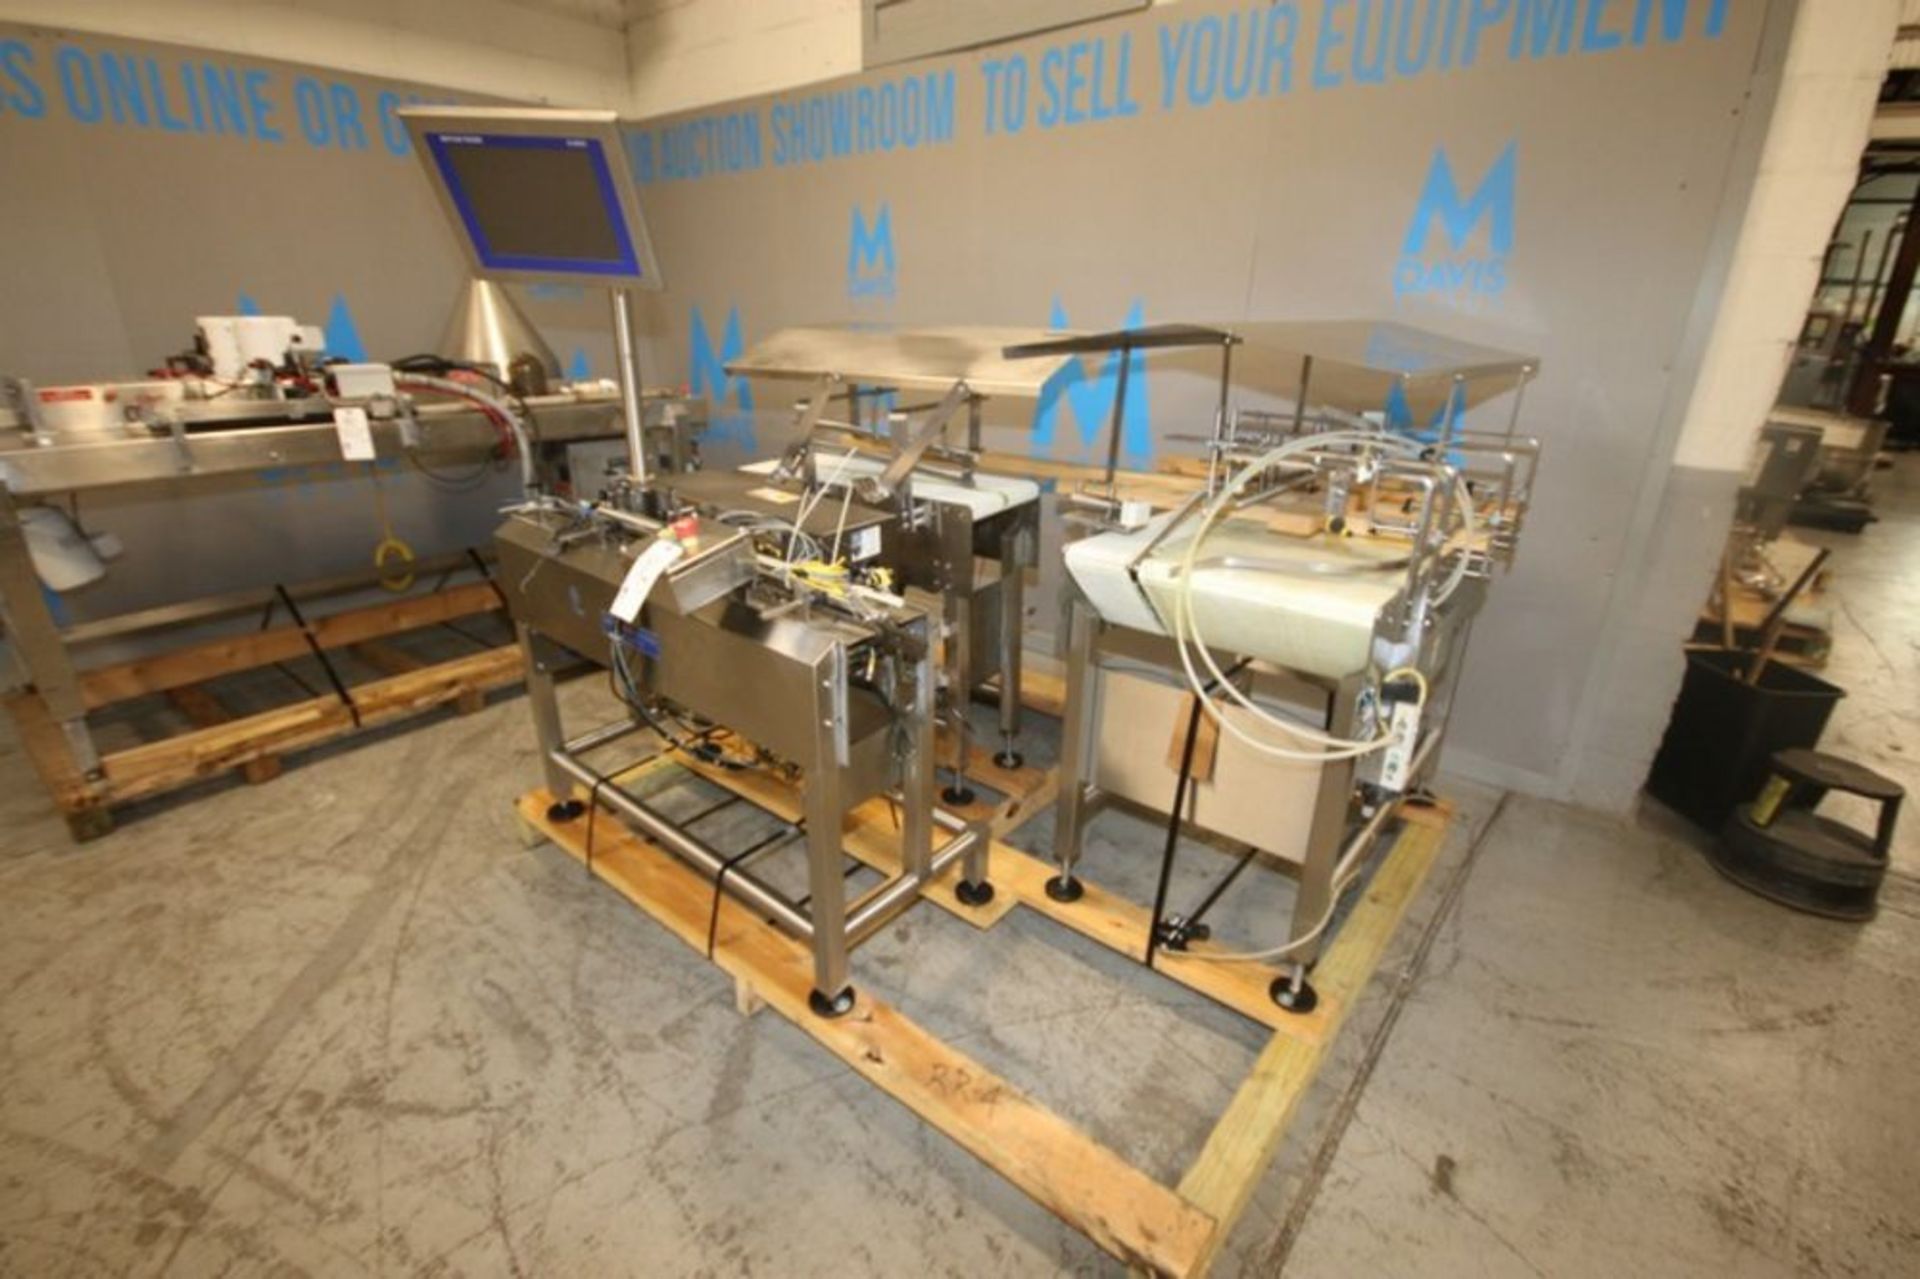 Mettler Toldeo Hi-Speed Check Weigher, M/N XS, S/N 12005321, 120 Volts, 1 Phase, with (2) Sections - Image 2 of 12